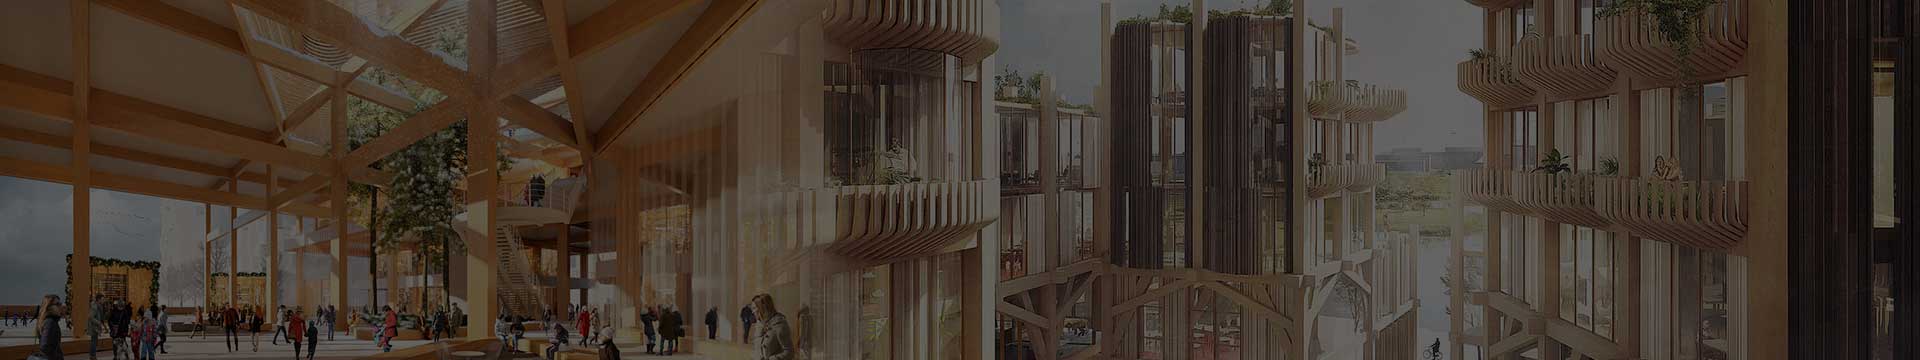 Mass Timber Architectural Building